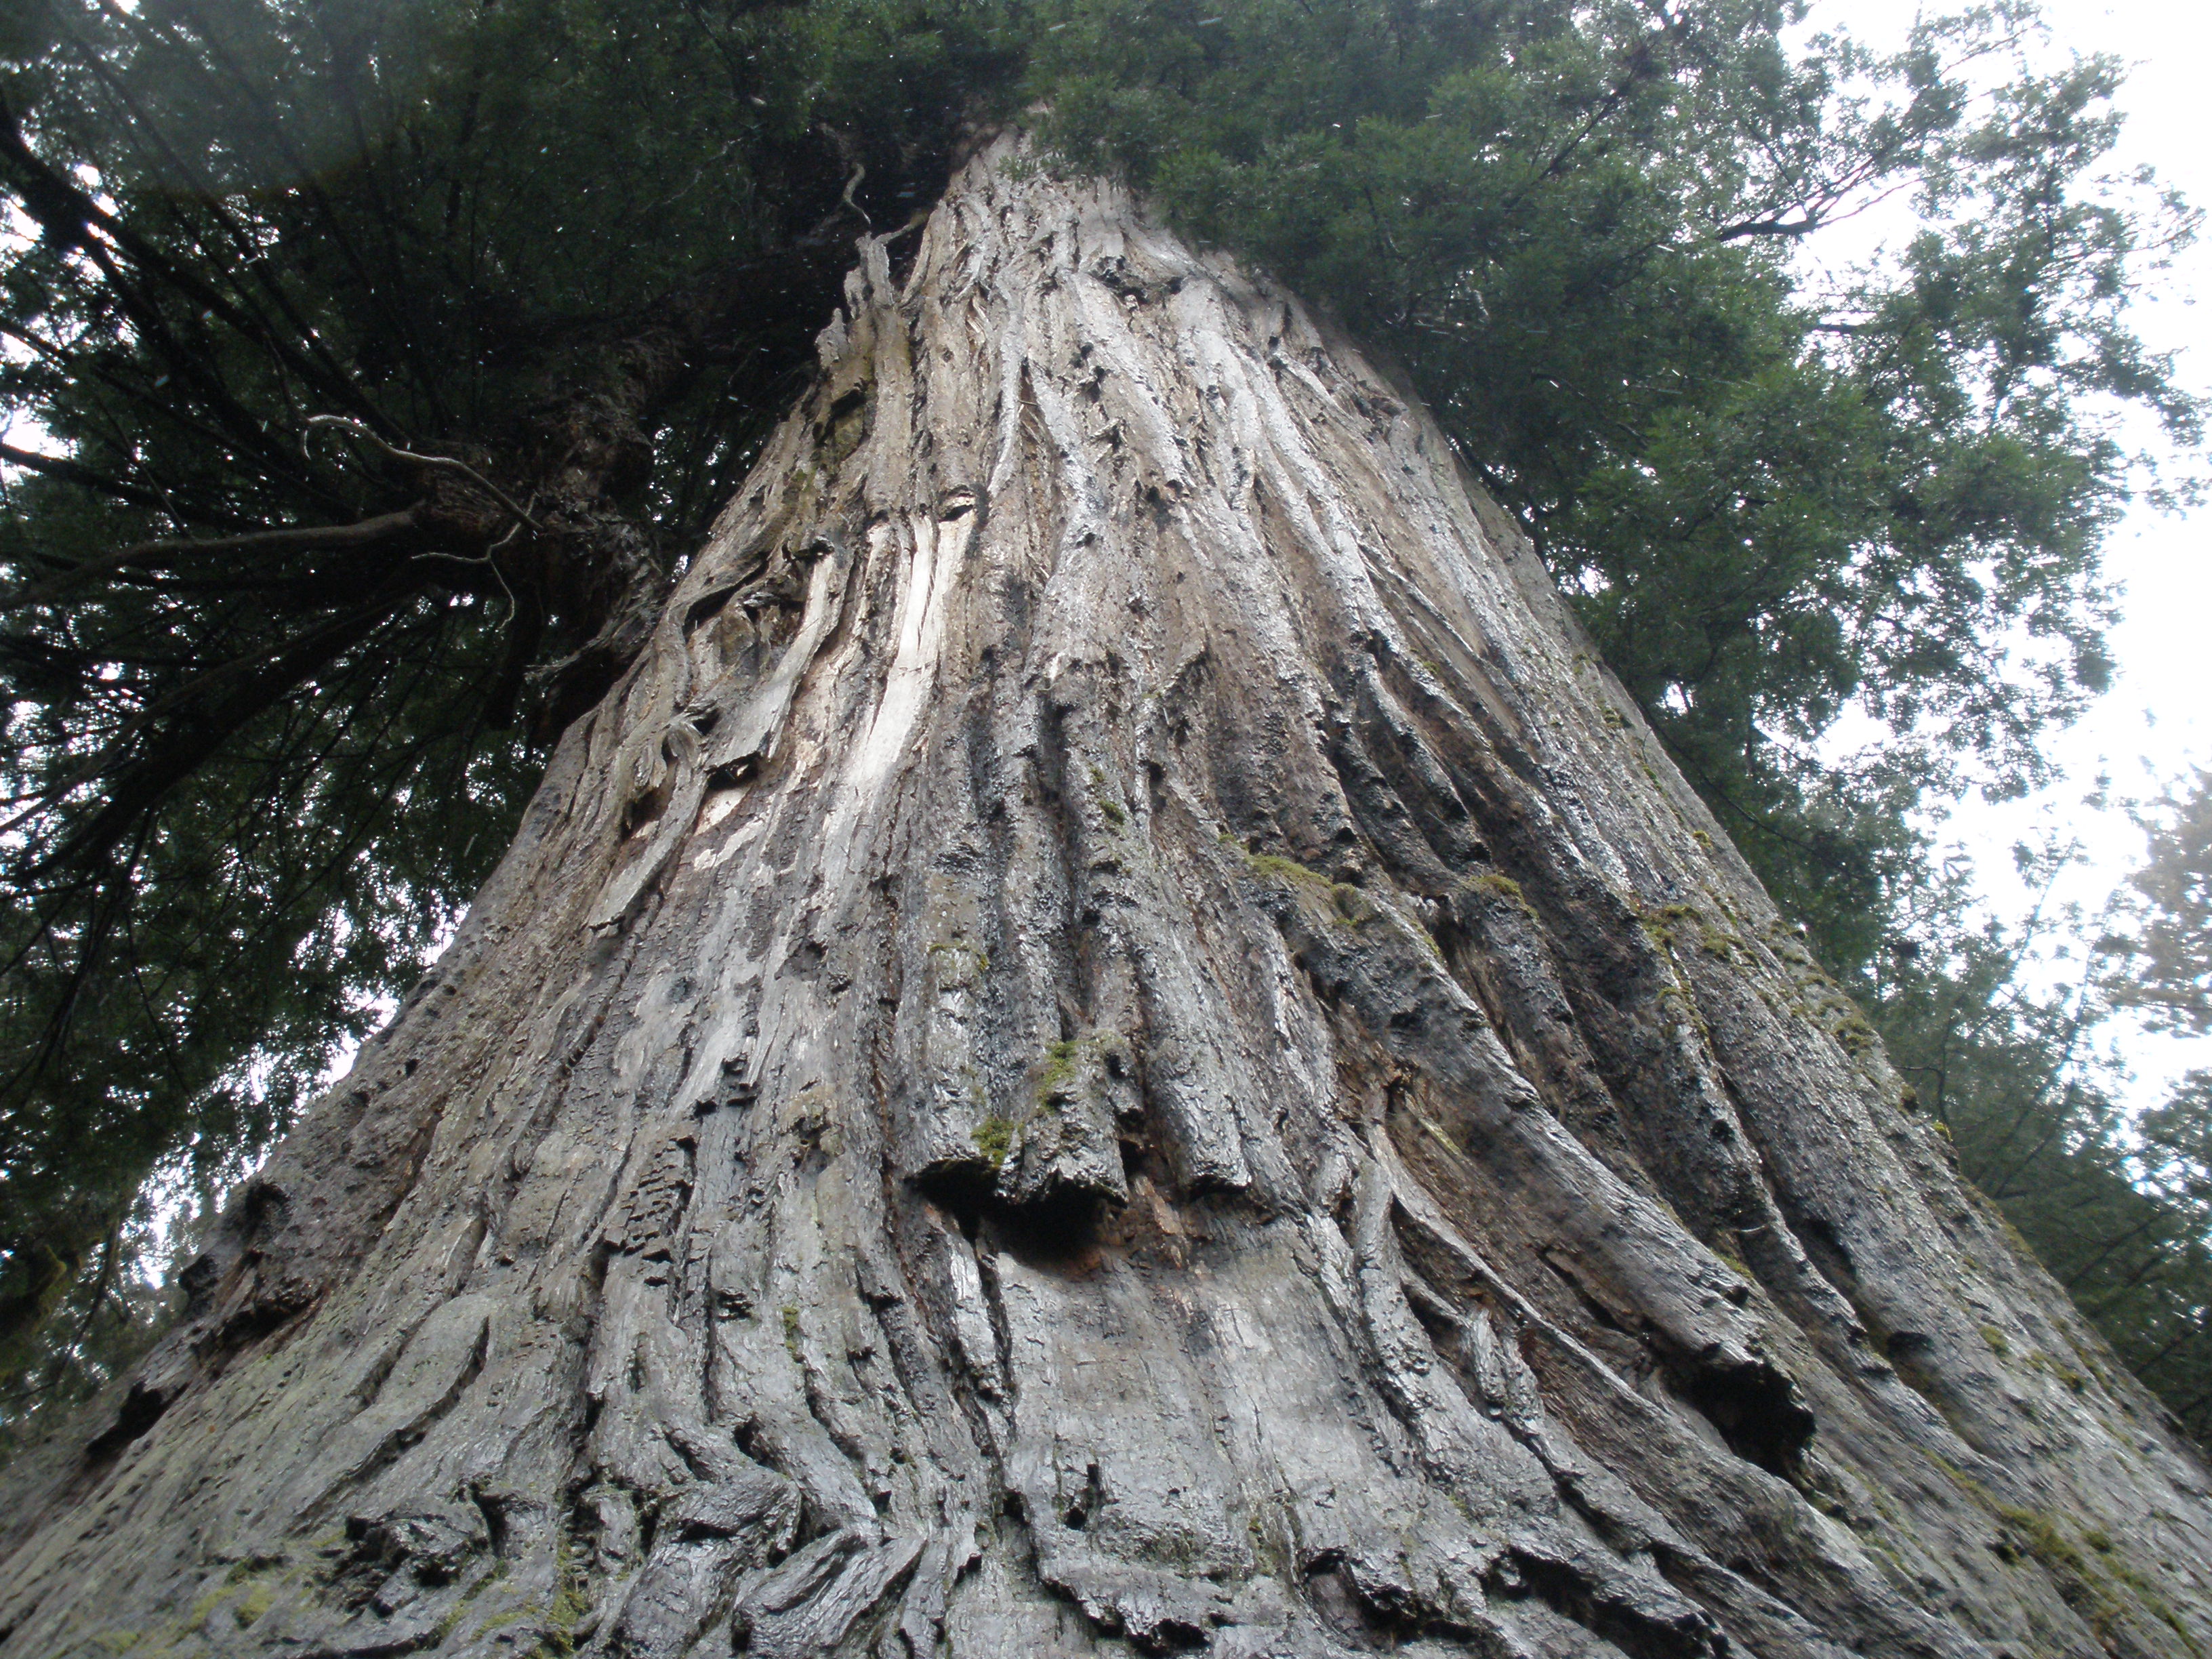 Personal photo: The deep grooves of the coast redwood help the tree protect itself against fire damage.